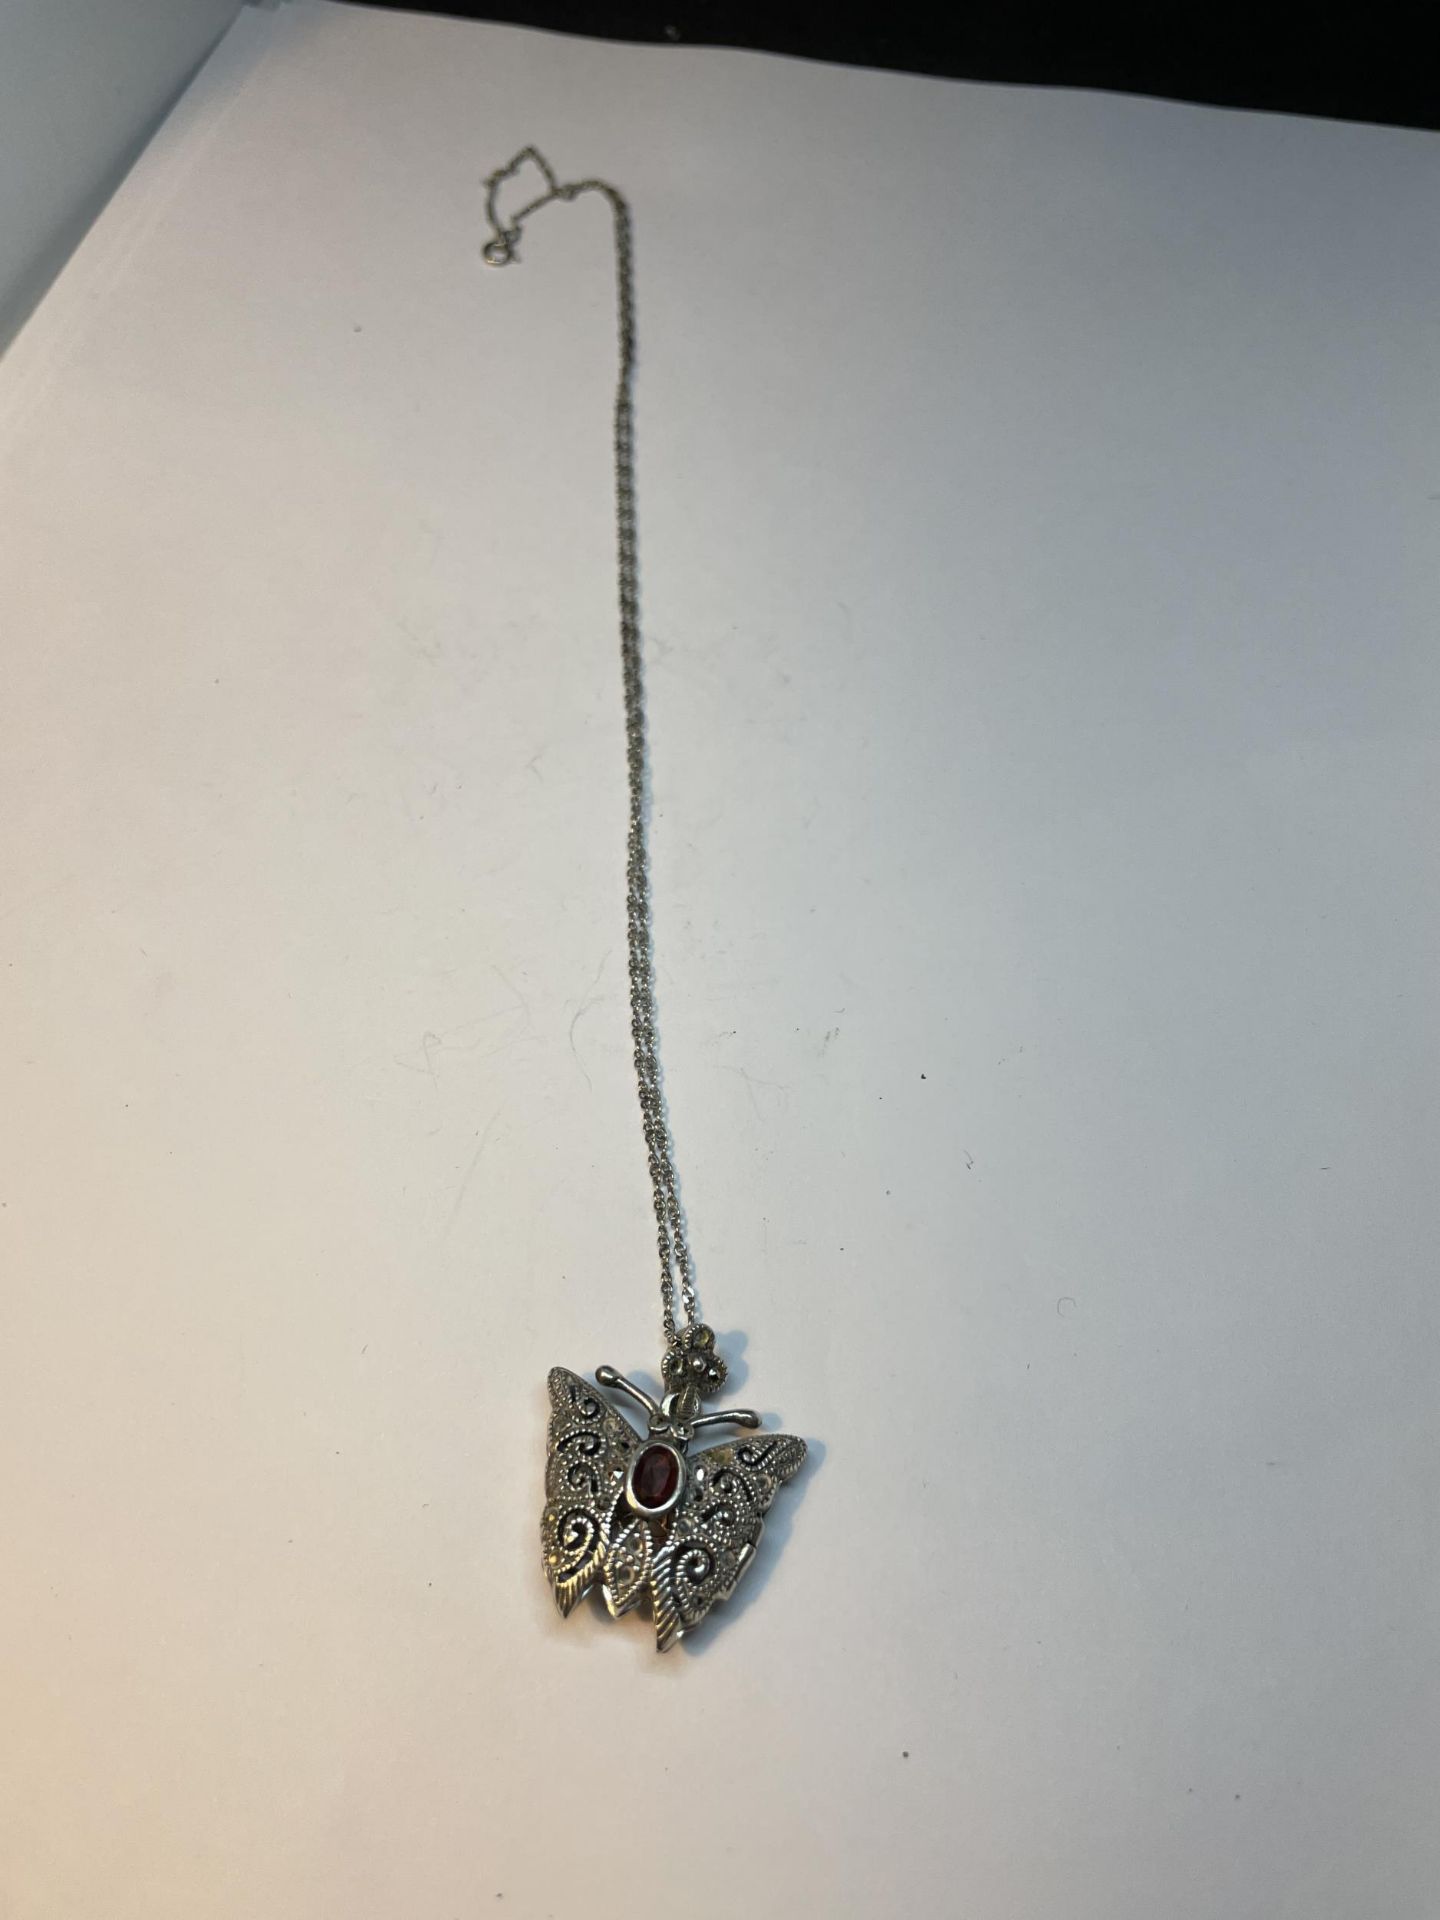 A MARKED 925 SILVER ORNATE BUTTERFLY LOCKET ON A CHAIN